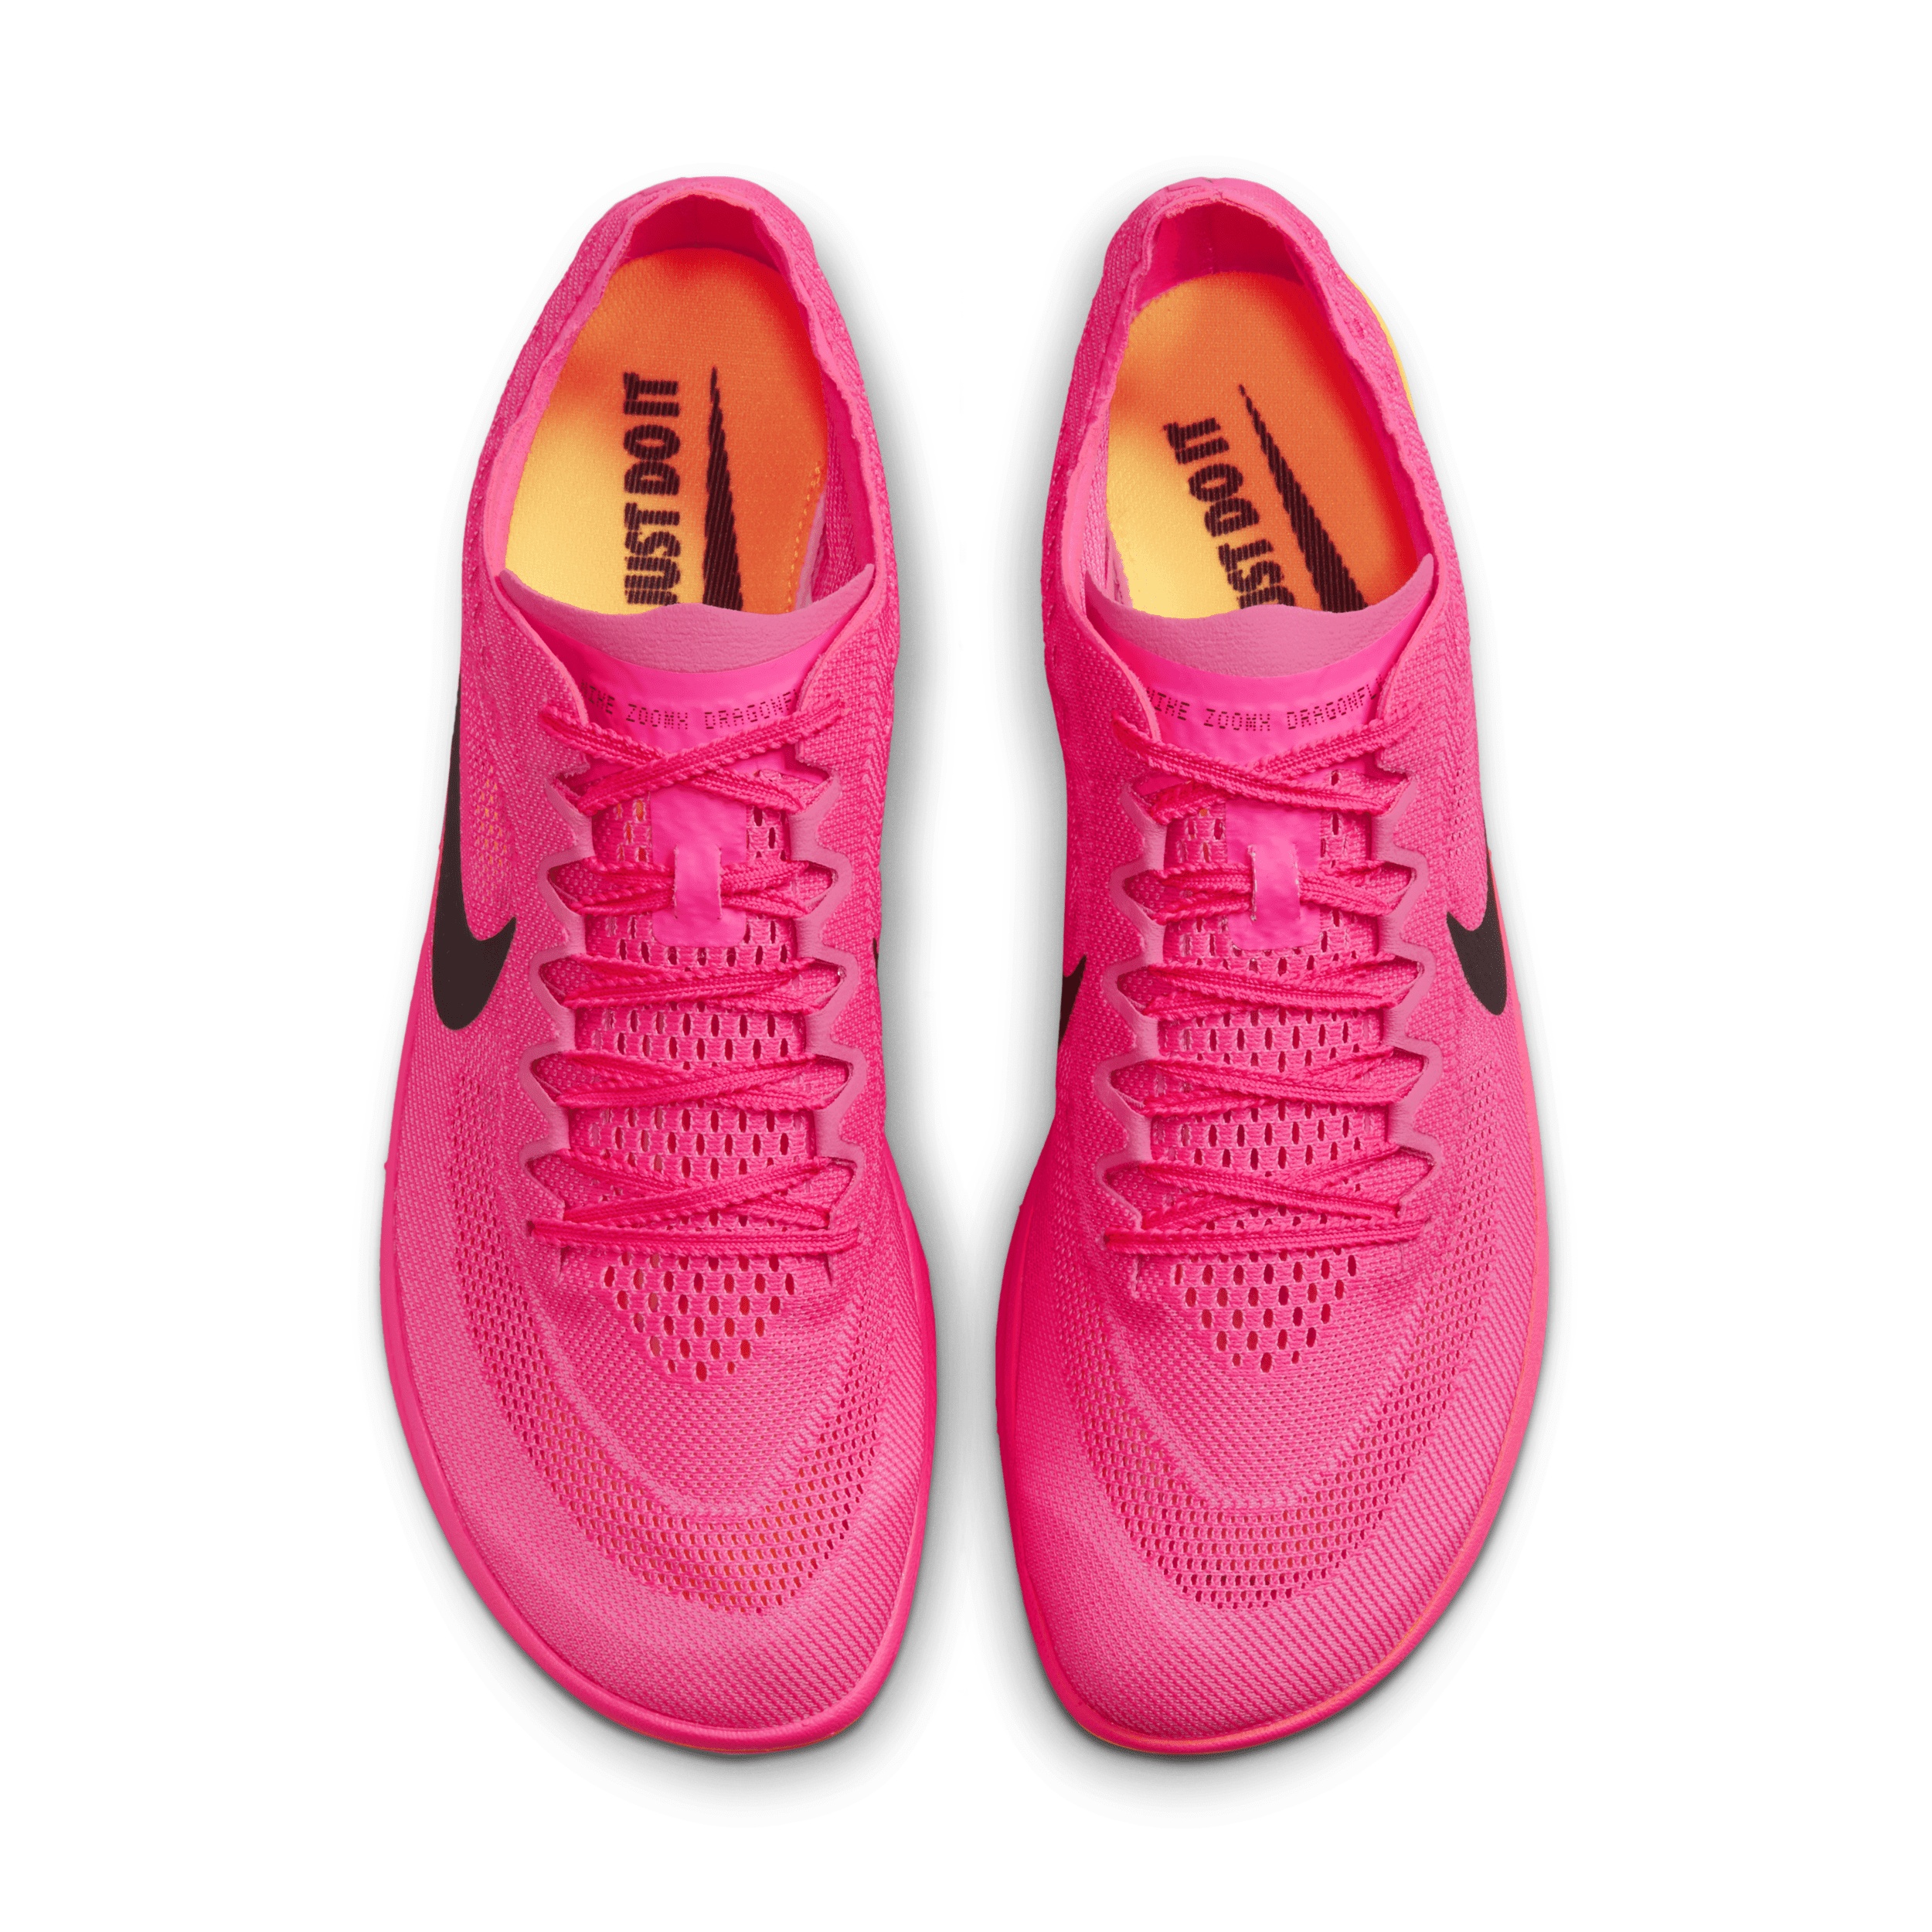 Nike Unisex ZoomX Dragonfly Track & Field Distance Spikes - 4